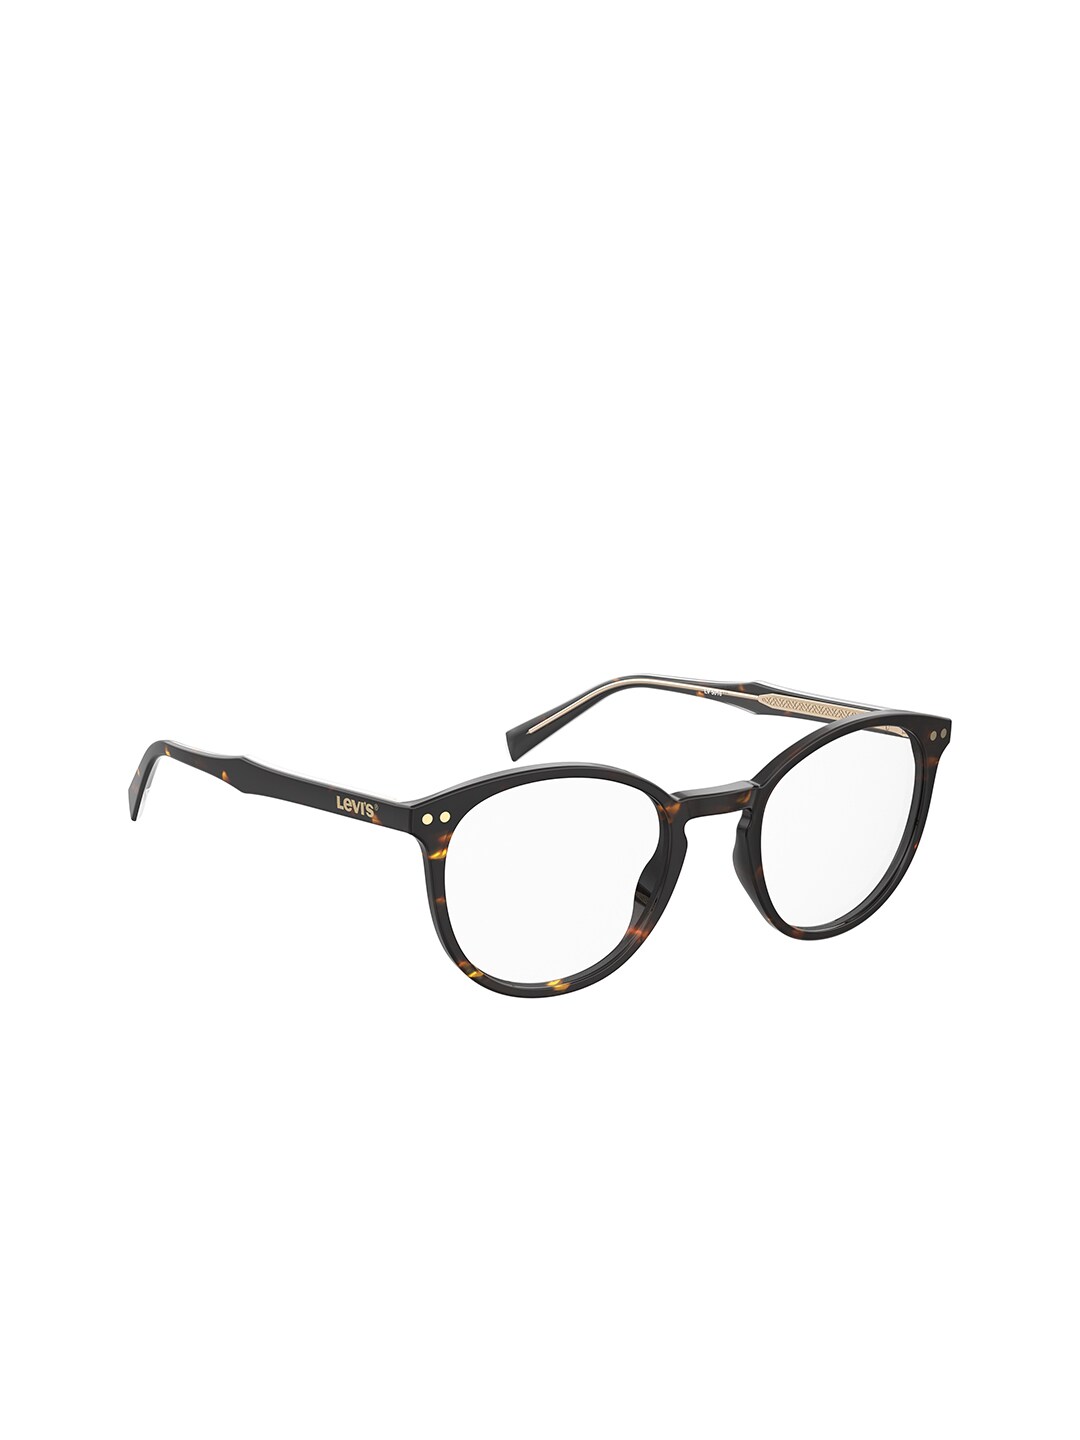 Levis Women Clear Lens & Brown Other Sunglasses with Polarised Lens Price in India